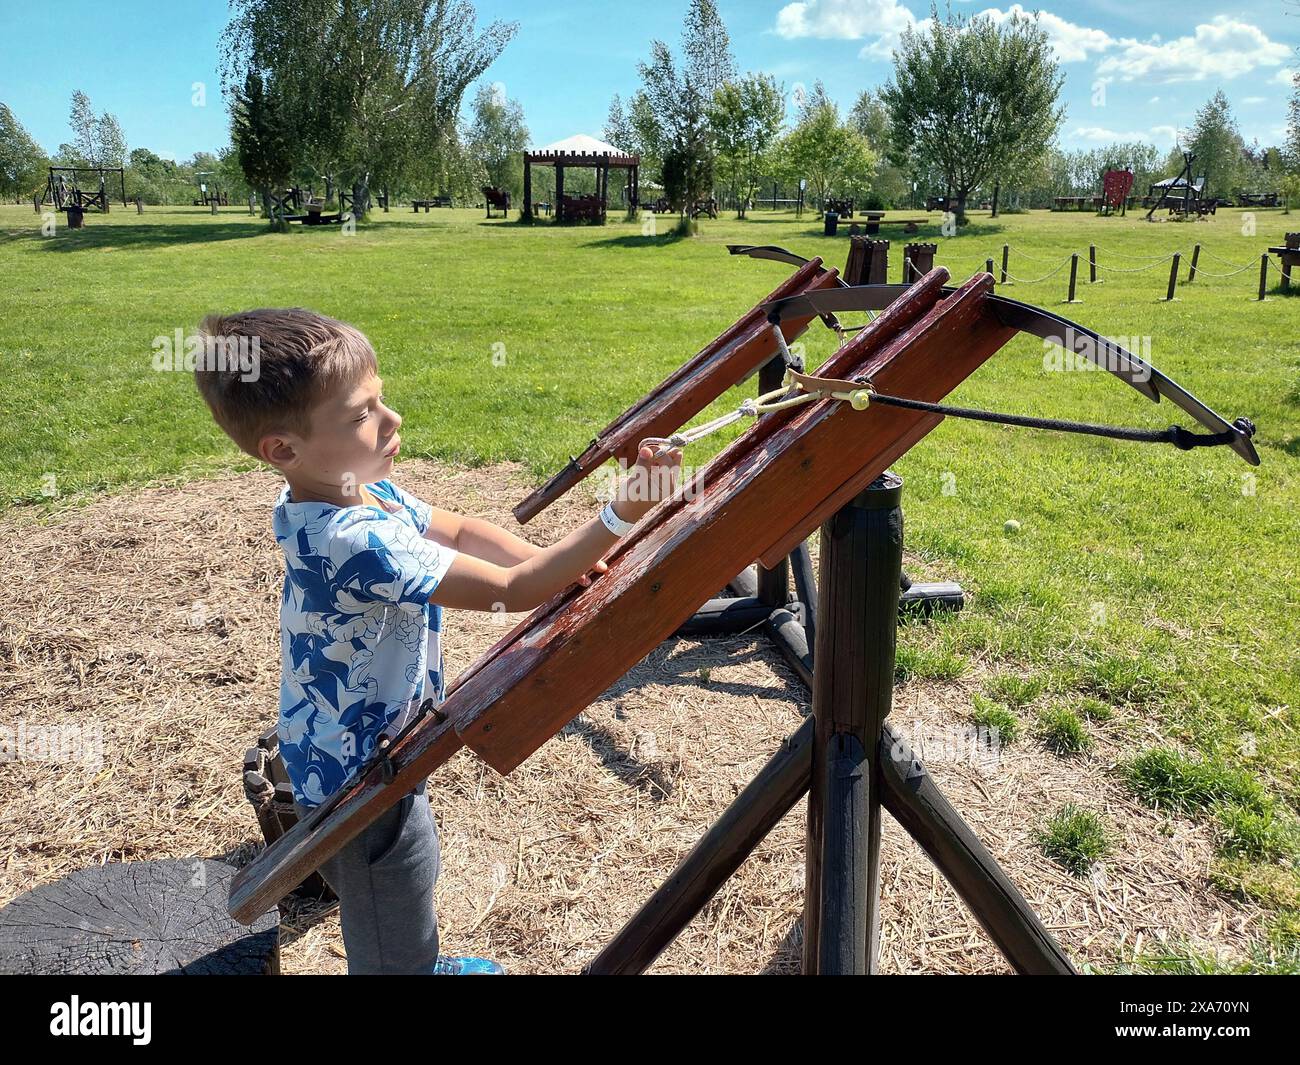 A small child holding a wooden crossbow Stock Photo